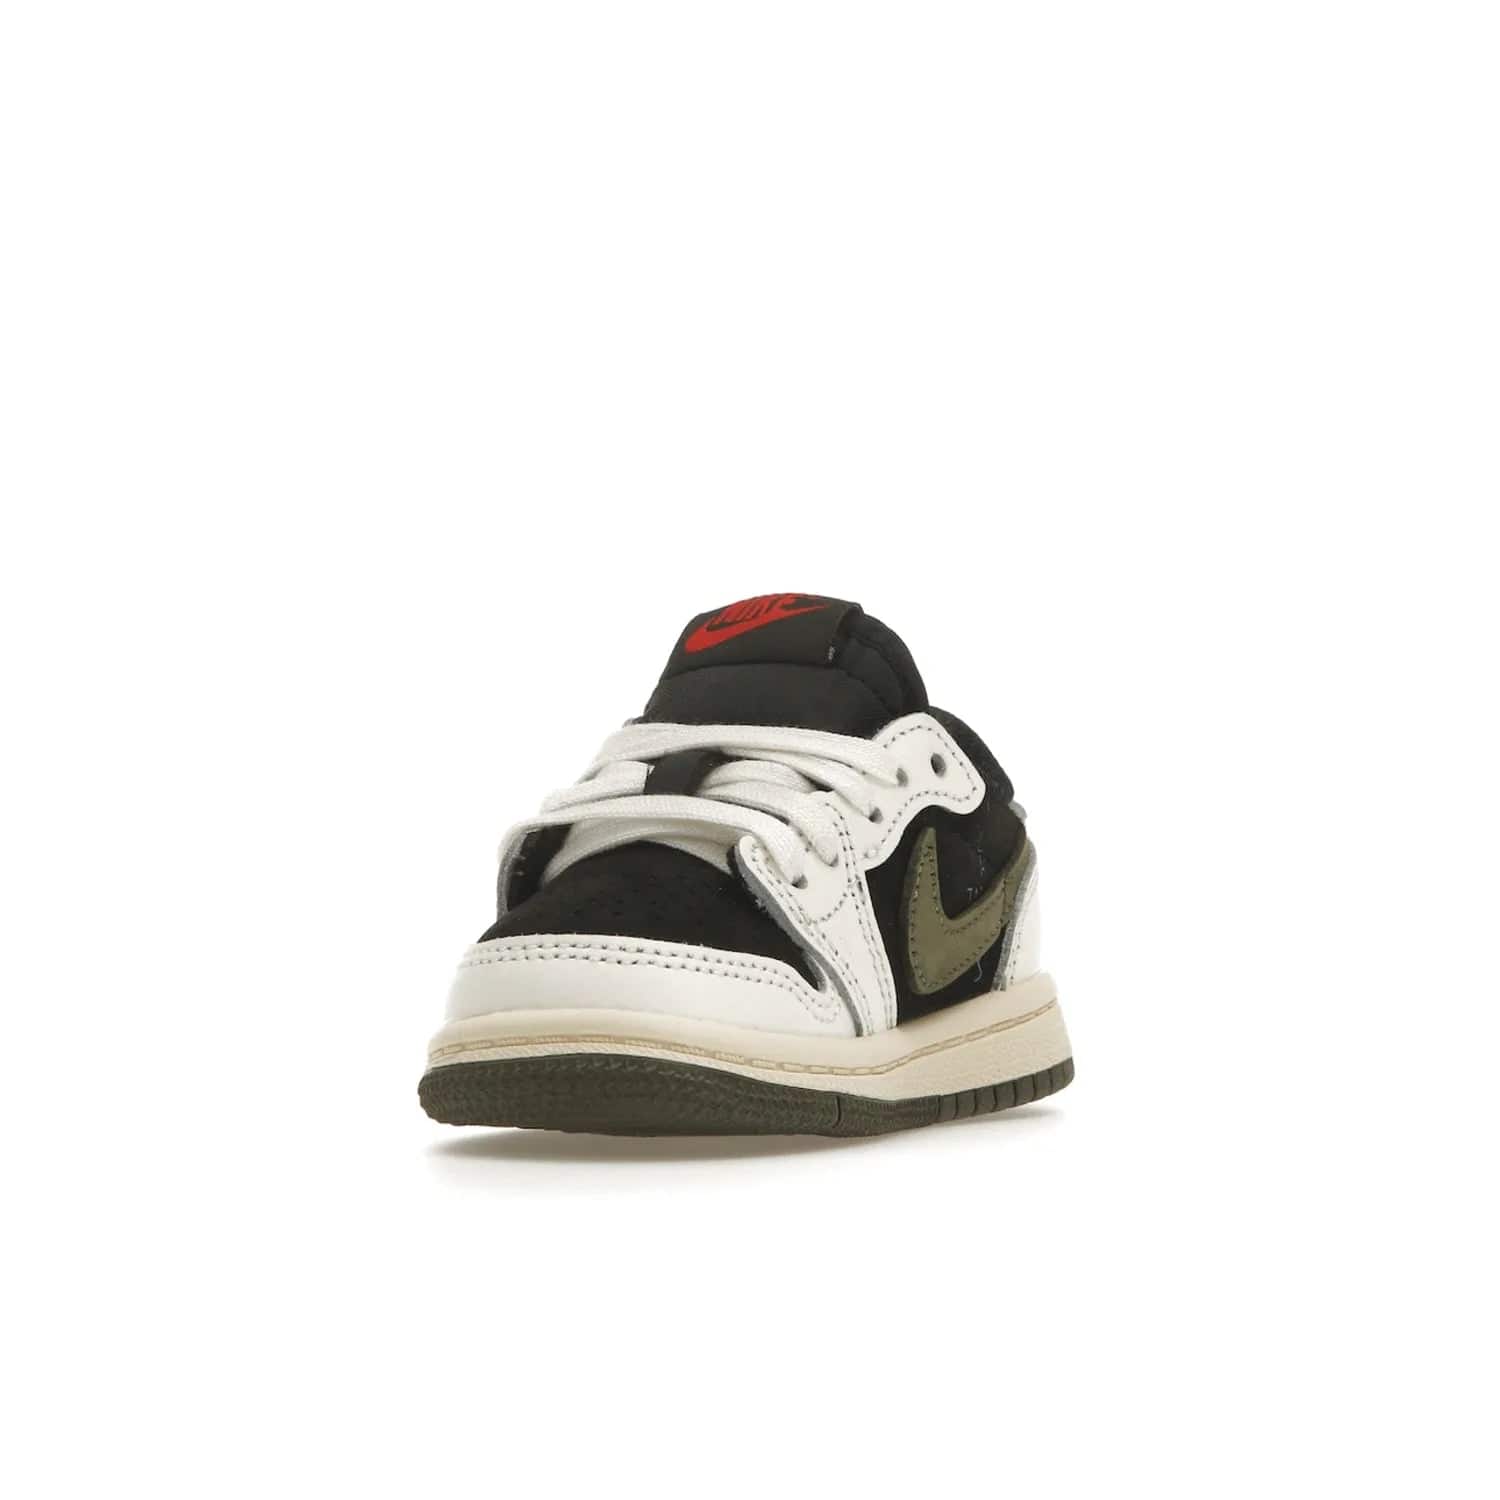 Jordan 1 Retro Low OG SP Travis Scott Olive (TD) - Image 13 - Only at www.BallersClubKickz.com - Get the iconic style & comfort you love with the Jordan 1 Retro Low OG SP Travis Scott Olive. Featuring a premium upper, Sail, Red, Black & Olive colorway & a durable rubber outsole for traction & cushioning. Get it now!